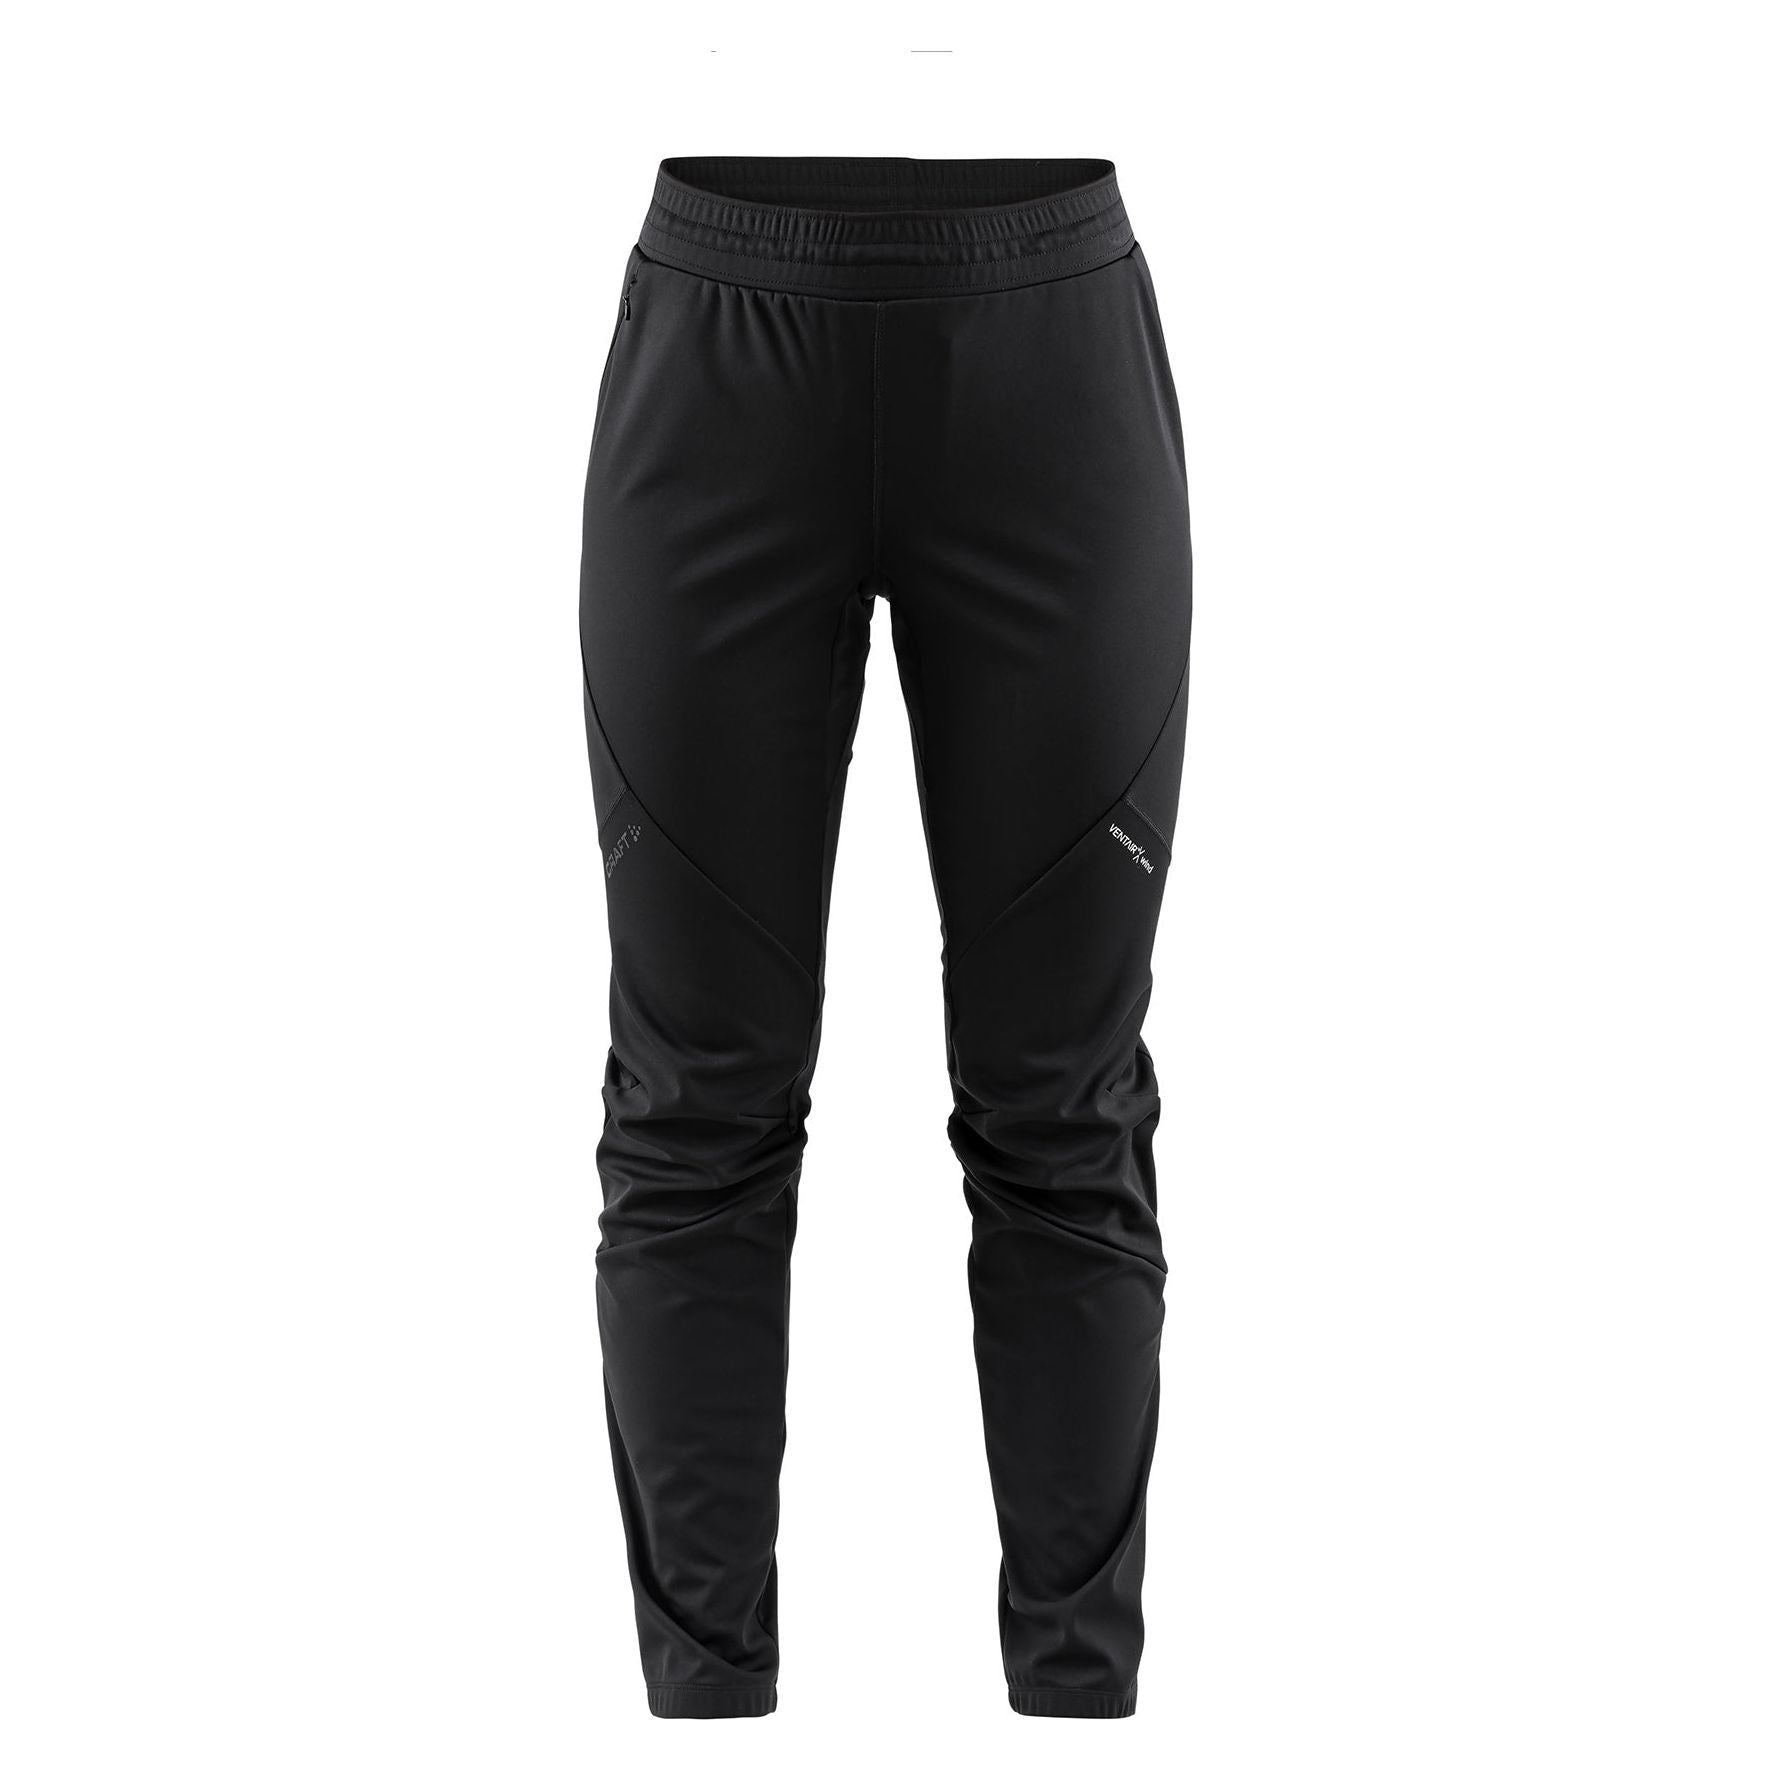 Uyn Woman Crossover Winter Speedy Pants - Women's training and